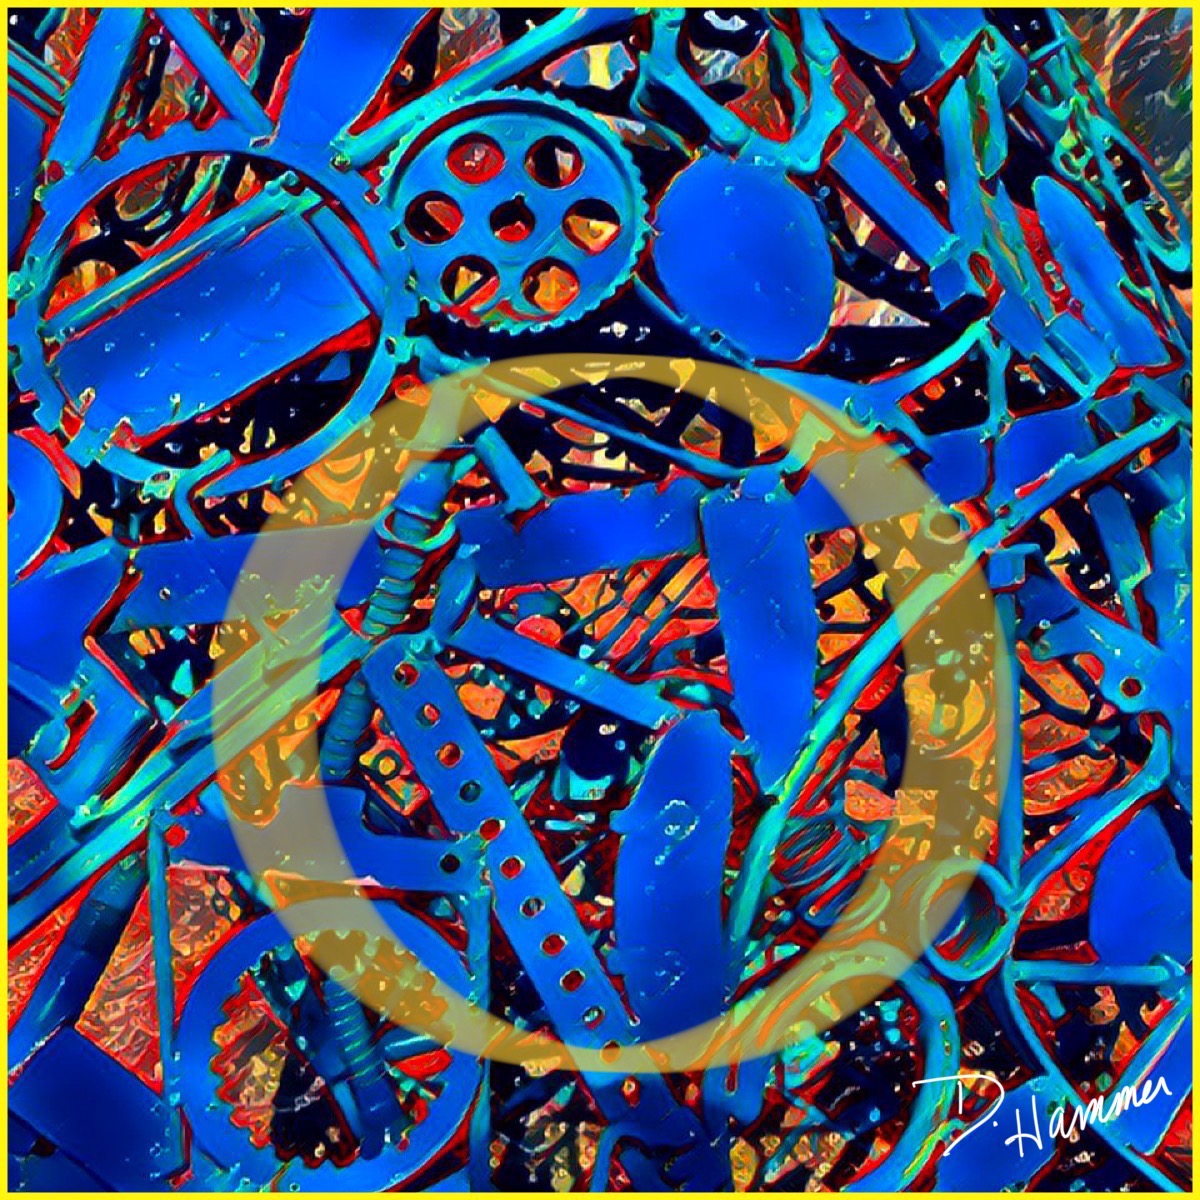 Abstract area of blue gears with bright yellow healing circle.